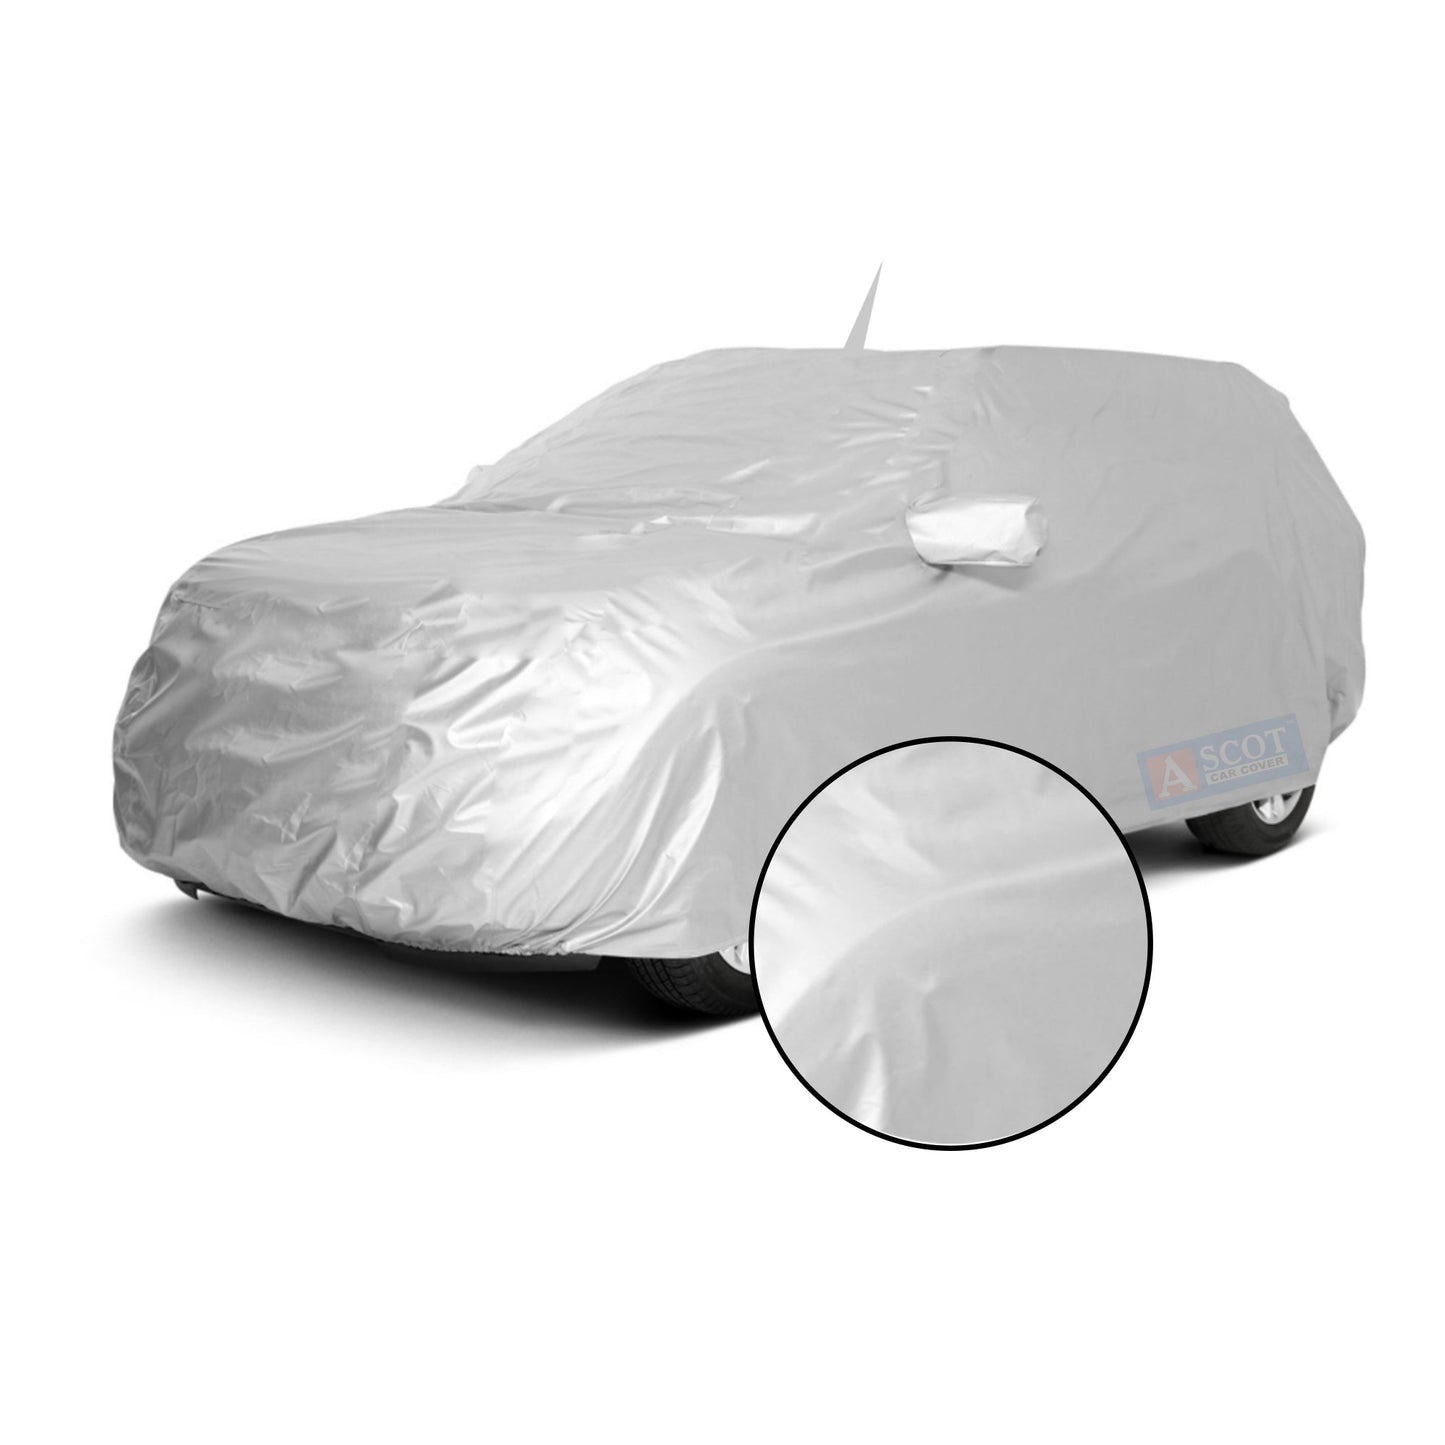 Ascot Mahindra Alturas G4 Car Body Cover Dust Proof, Trippel Stitched